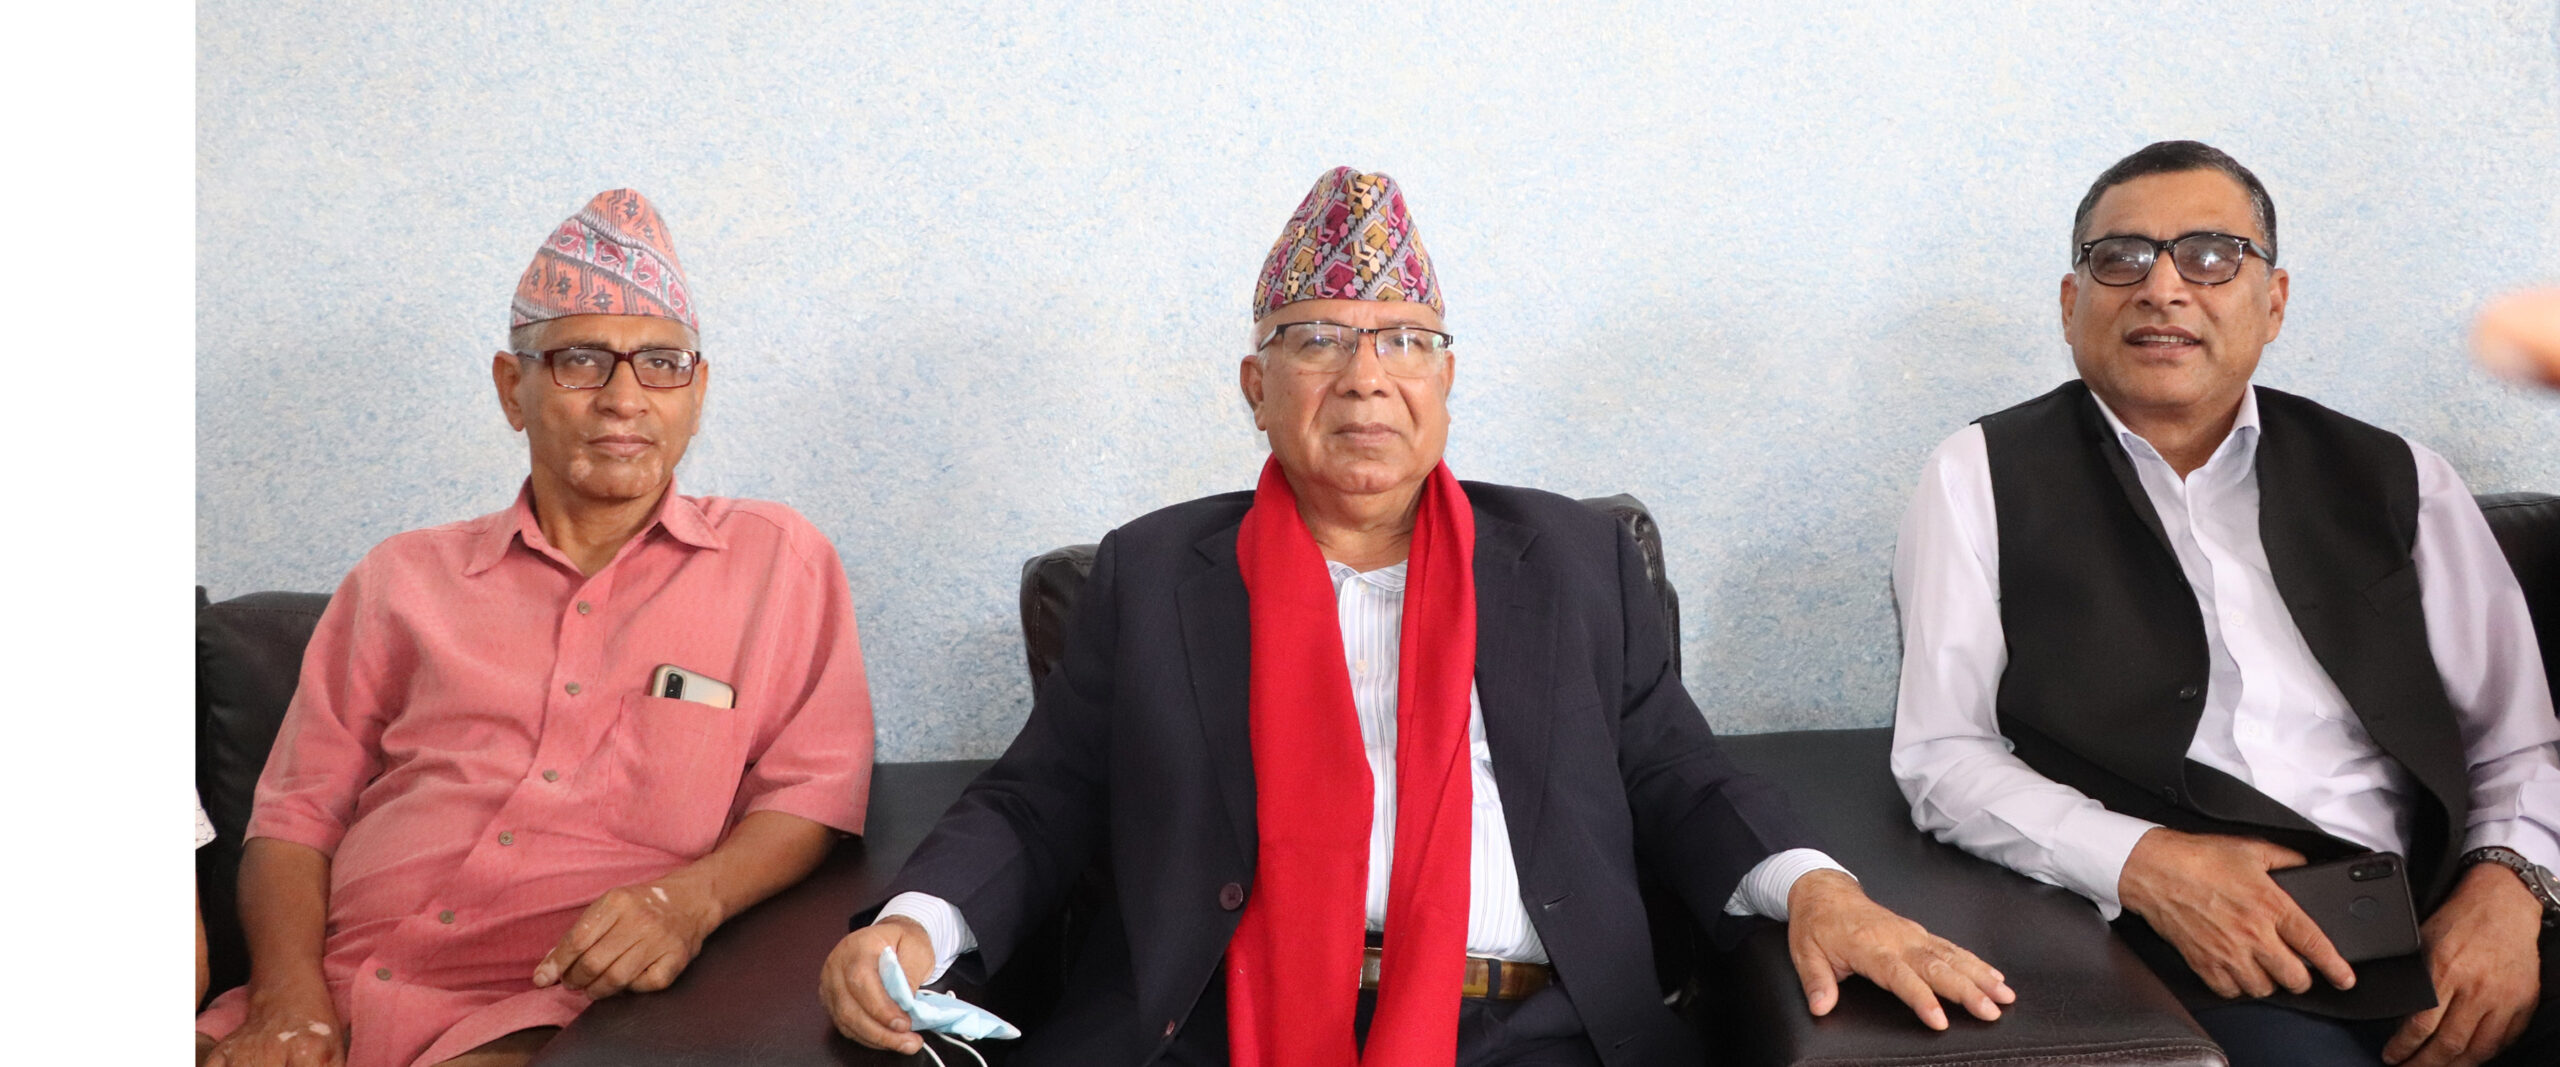 Election scenario in favour of alliance: Unified Socialist Chair Nepal